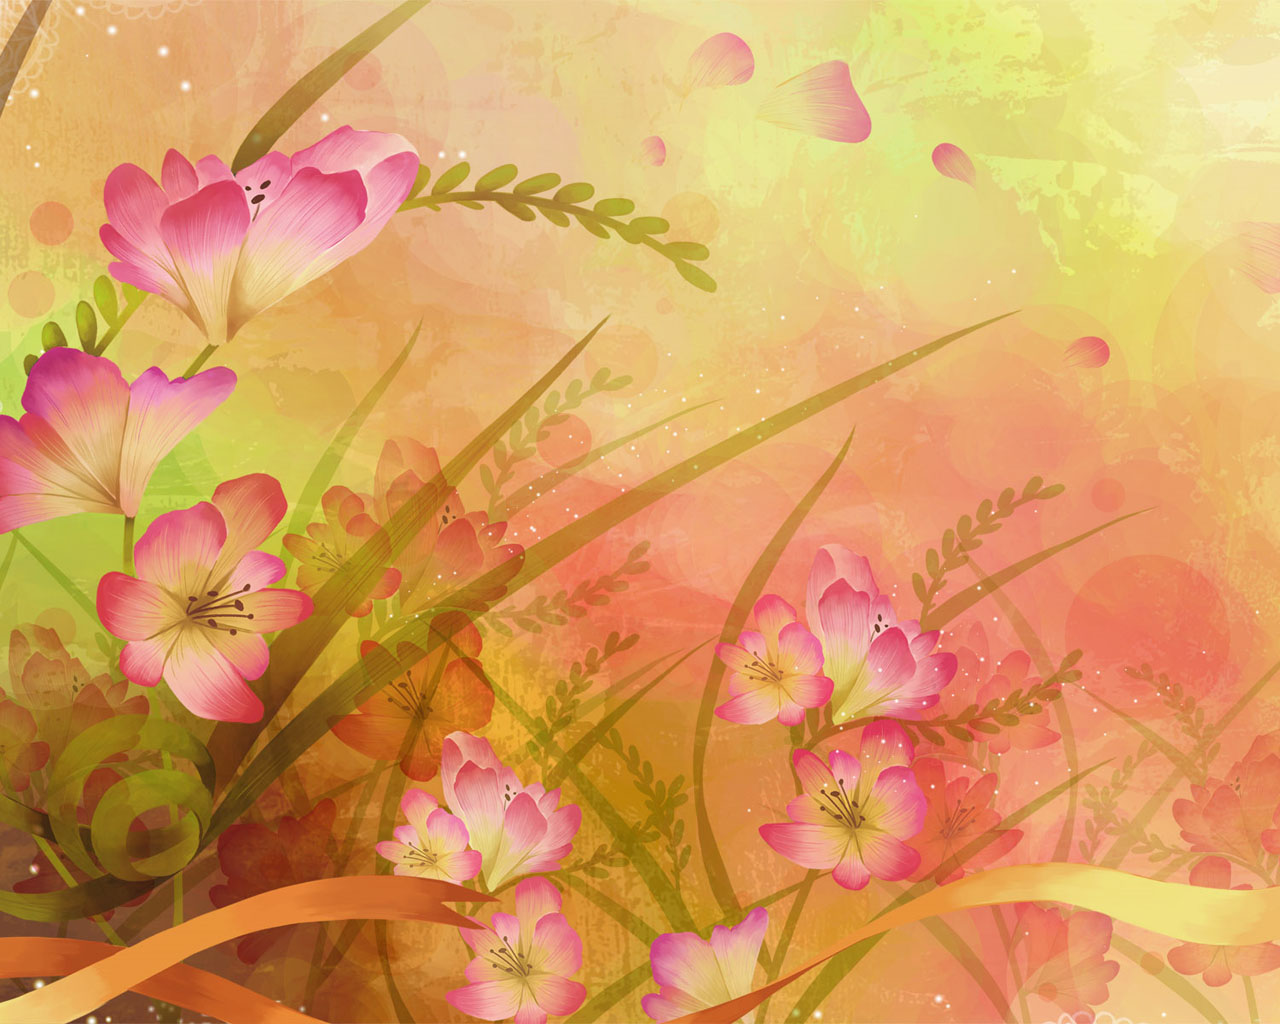 New Floral Wallpapers Feb 9 2011   Free Screensavers and Backgrounds